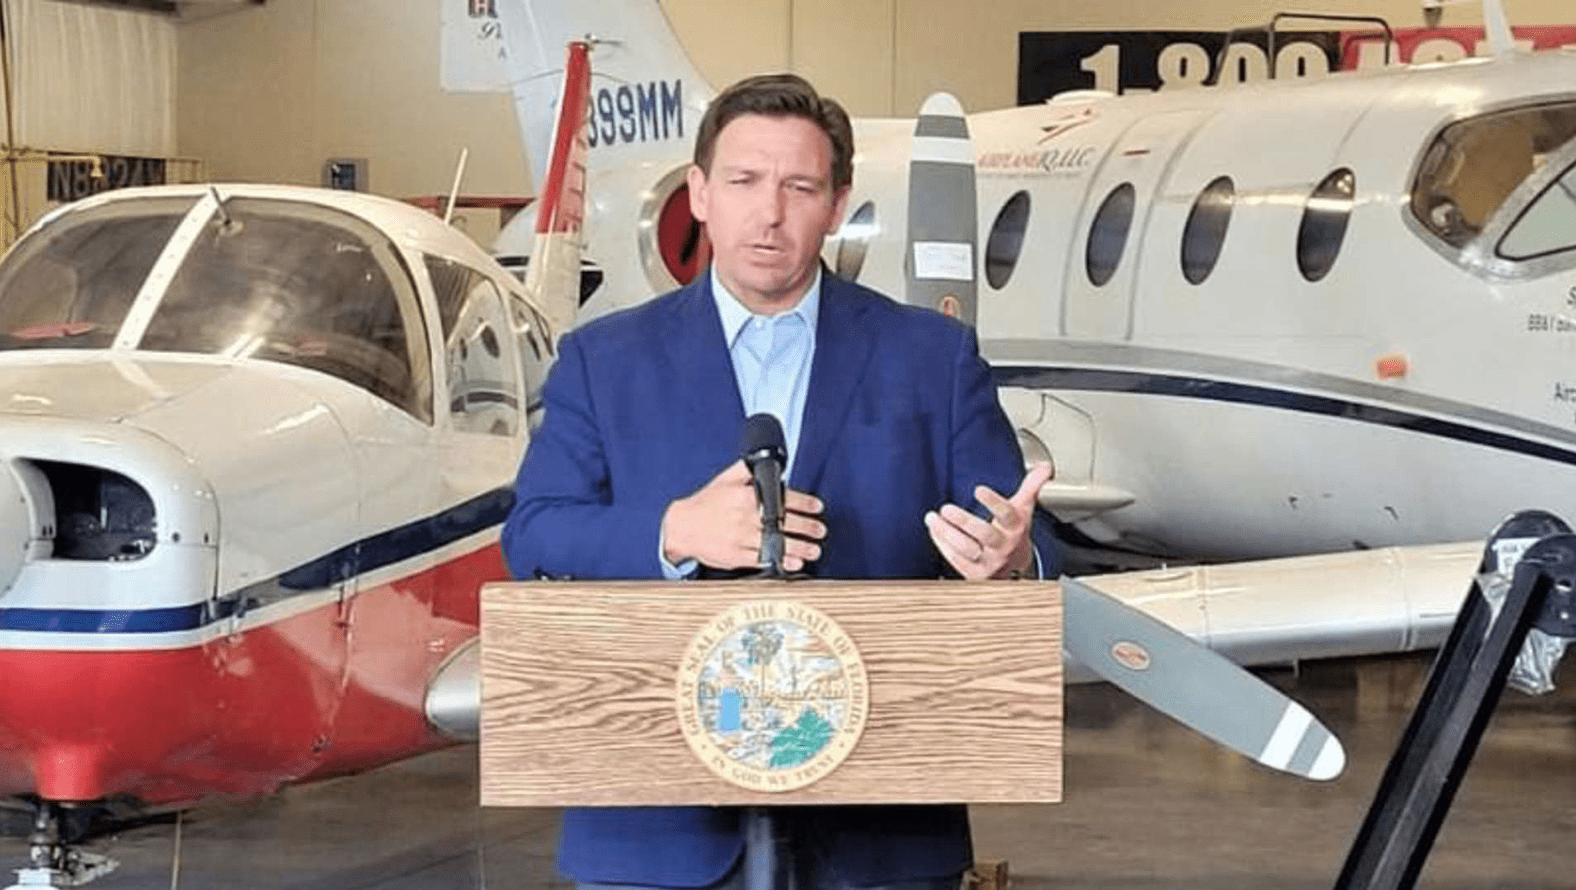 DeSantis standing in front of planes.